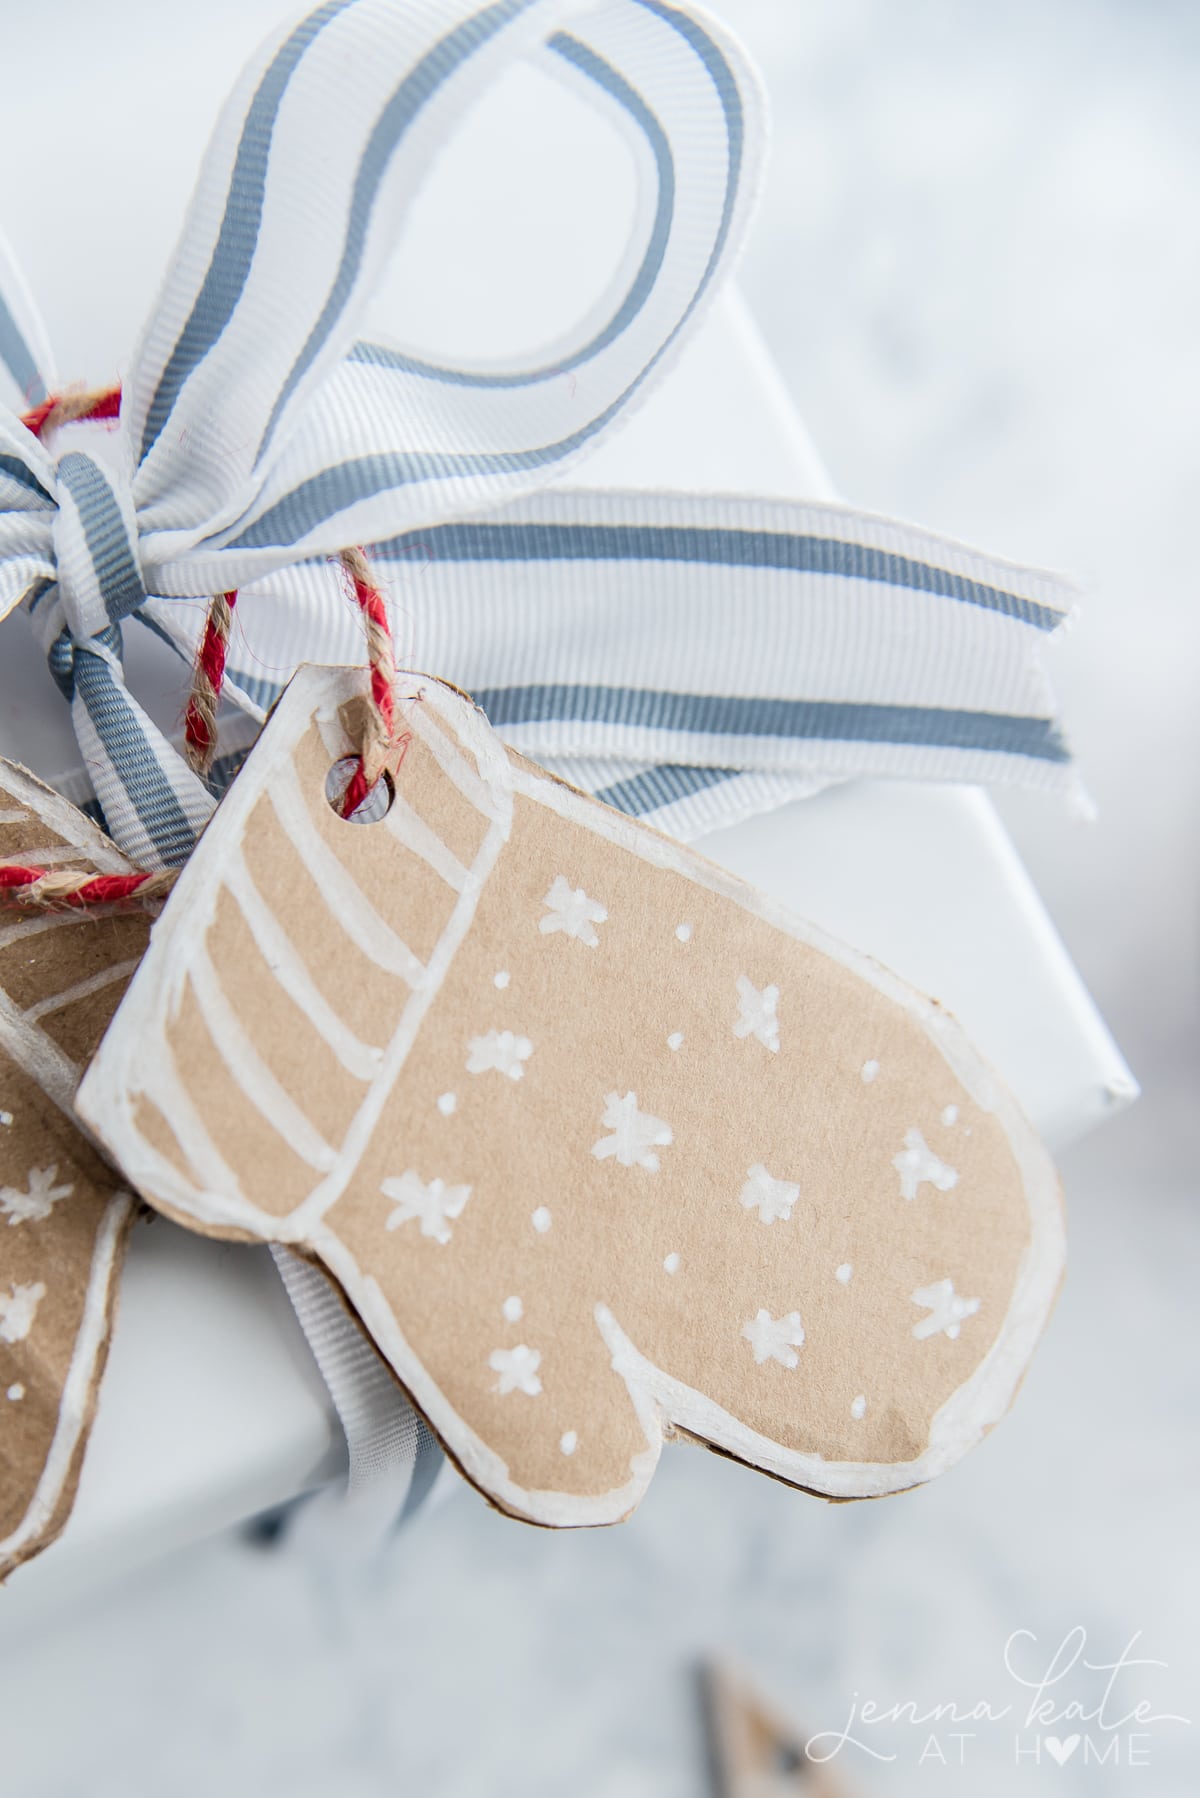 Cardboard mitten gift tag with white marker decorations